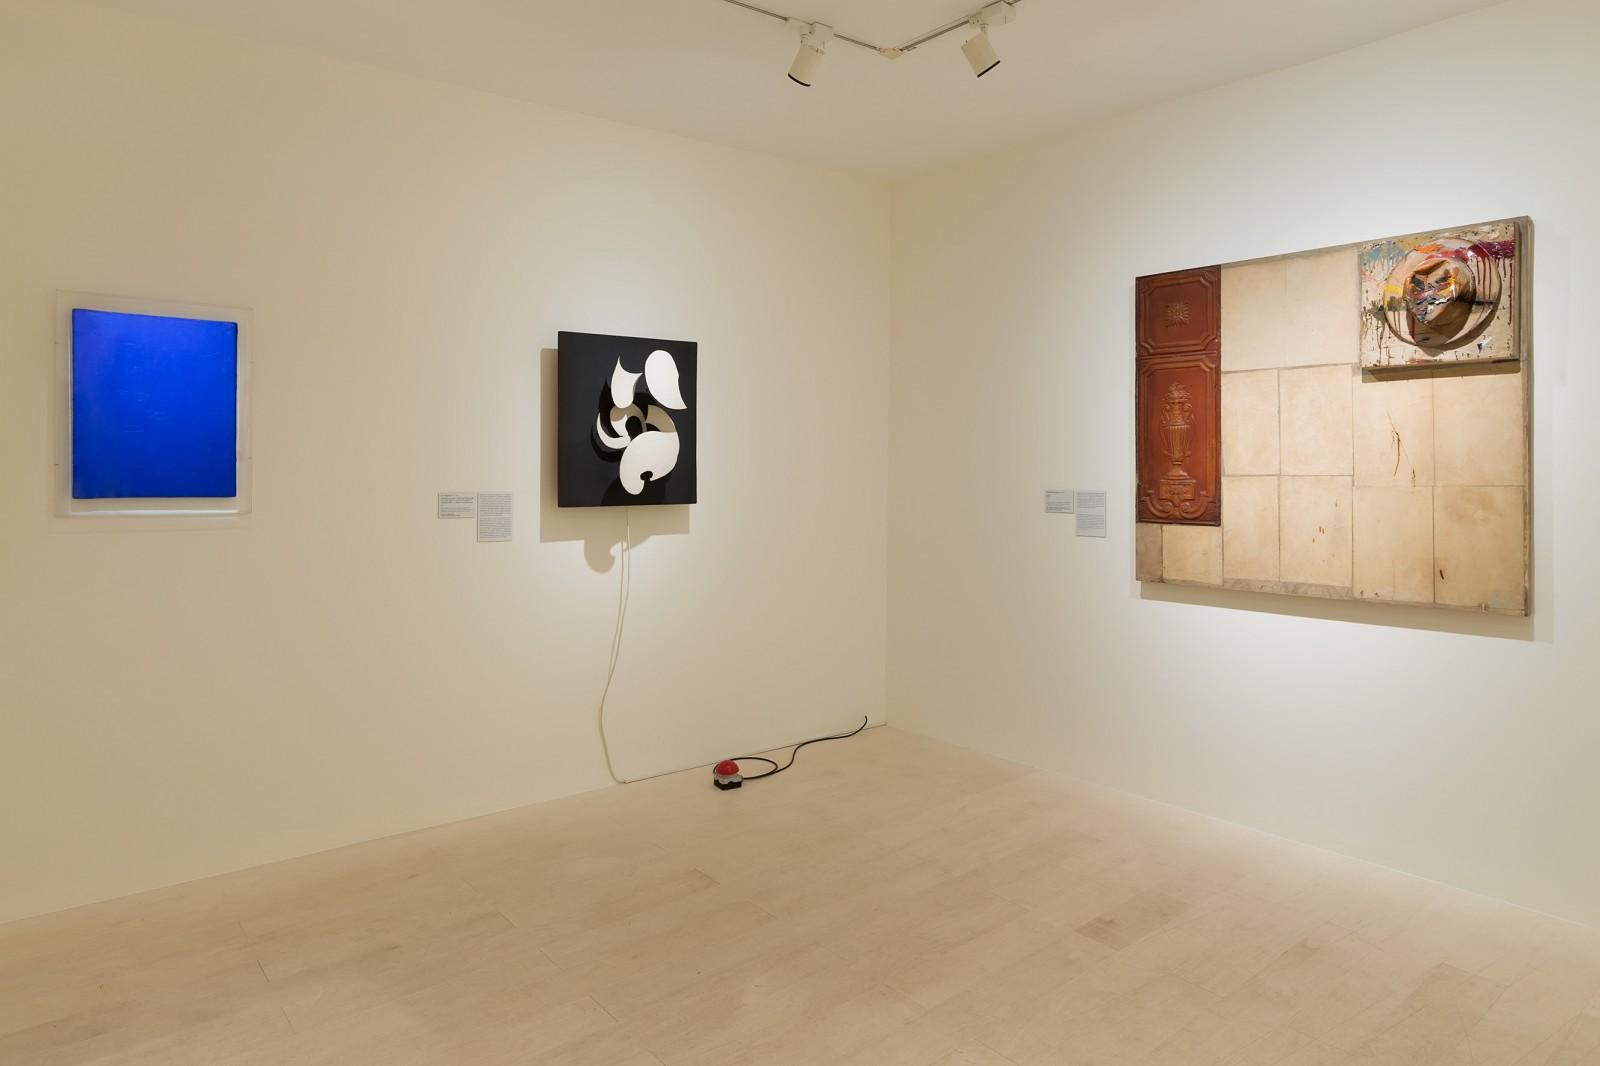 Vue de l'exposition, "Azimuth. Continuity and the new", Peggy Guggenheim Collection, 2014 (IKB sn 2)